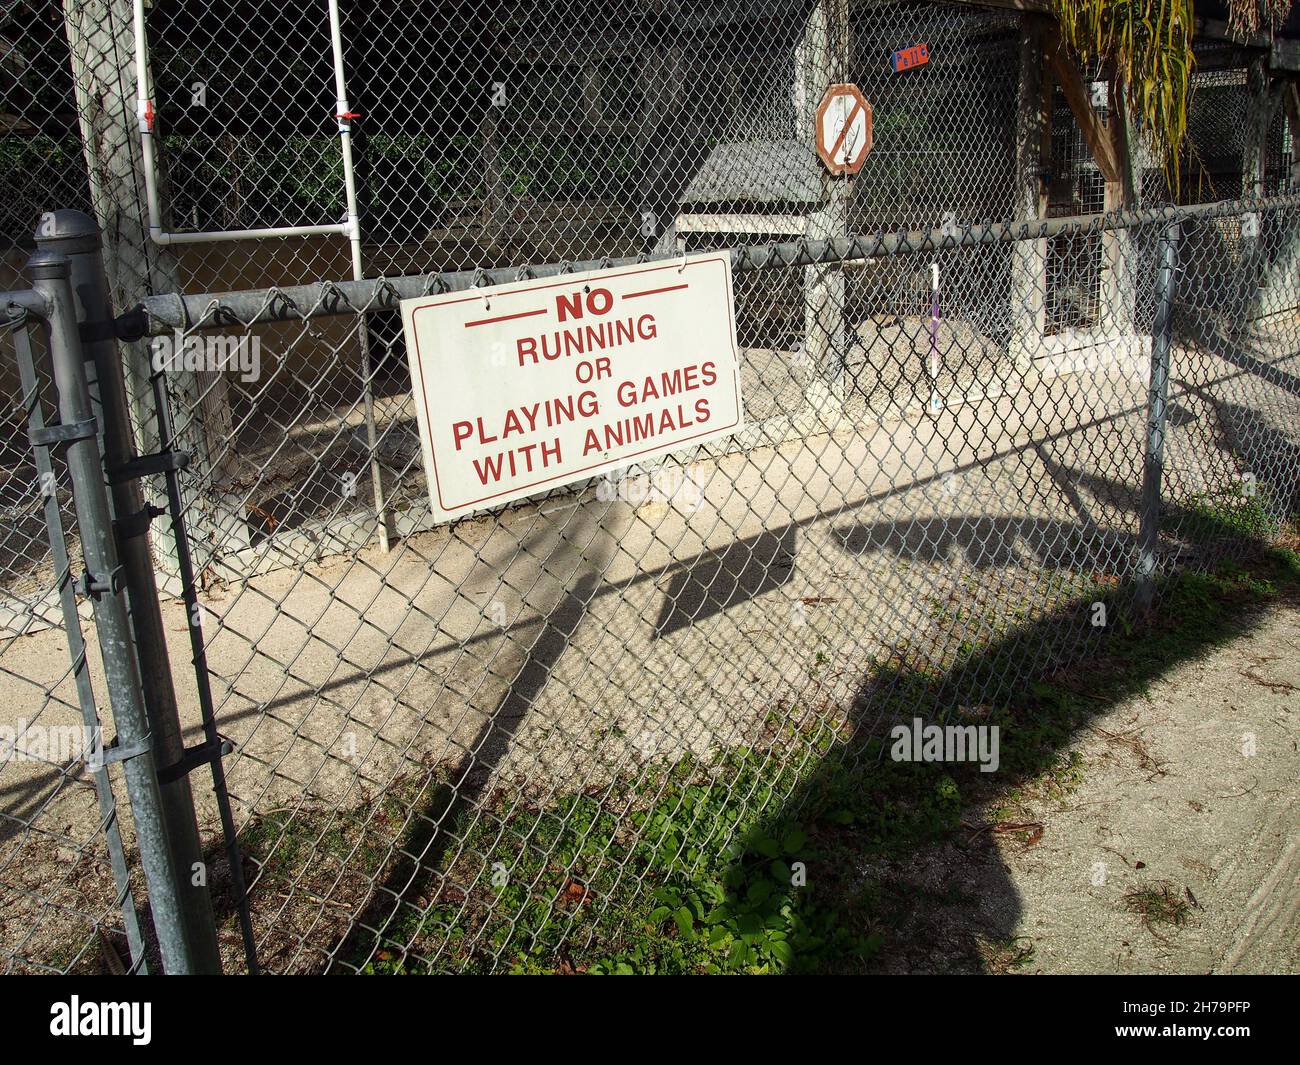 No Running Or Playing Games With Animals sign at the Octagon Wildlife Sanctuary in Punta Gorda, Florida, USA, 2020 © Katharine Andriotis Stock Photo